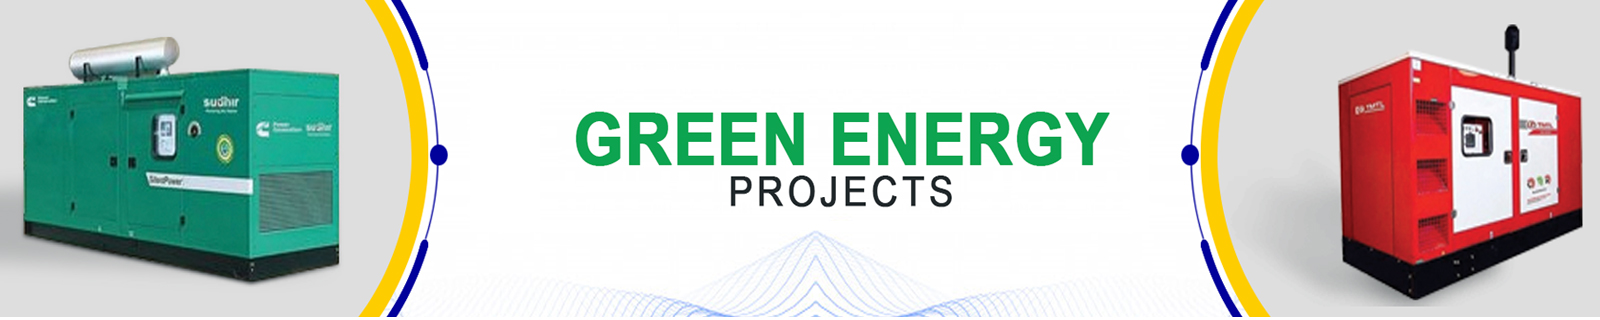 Green Energy Projects